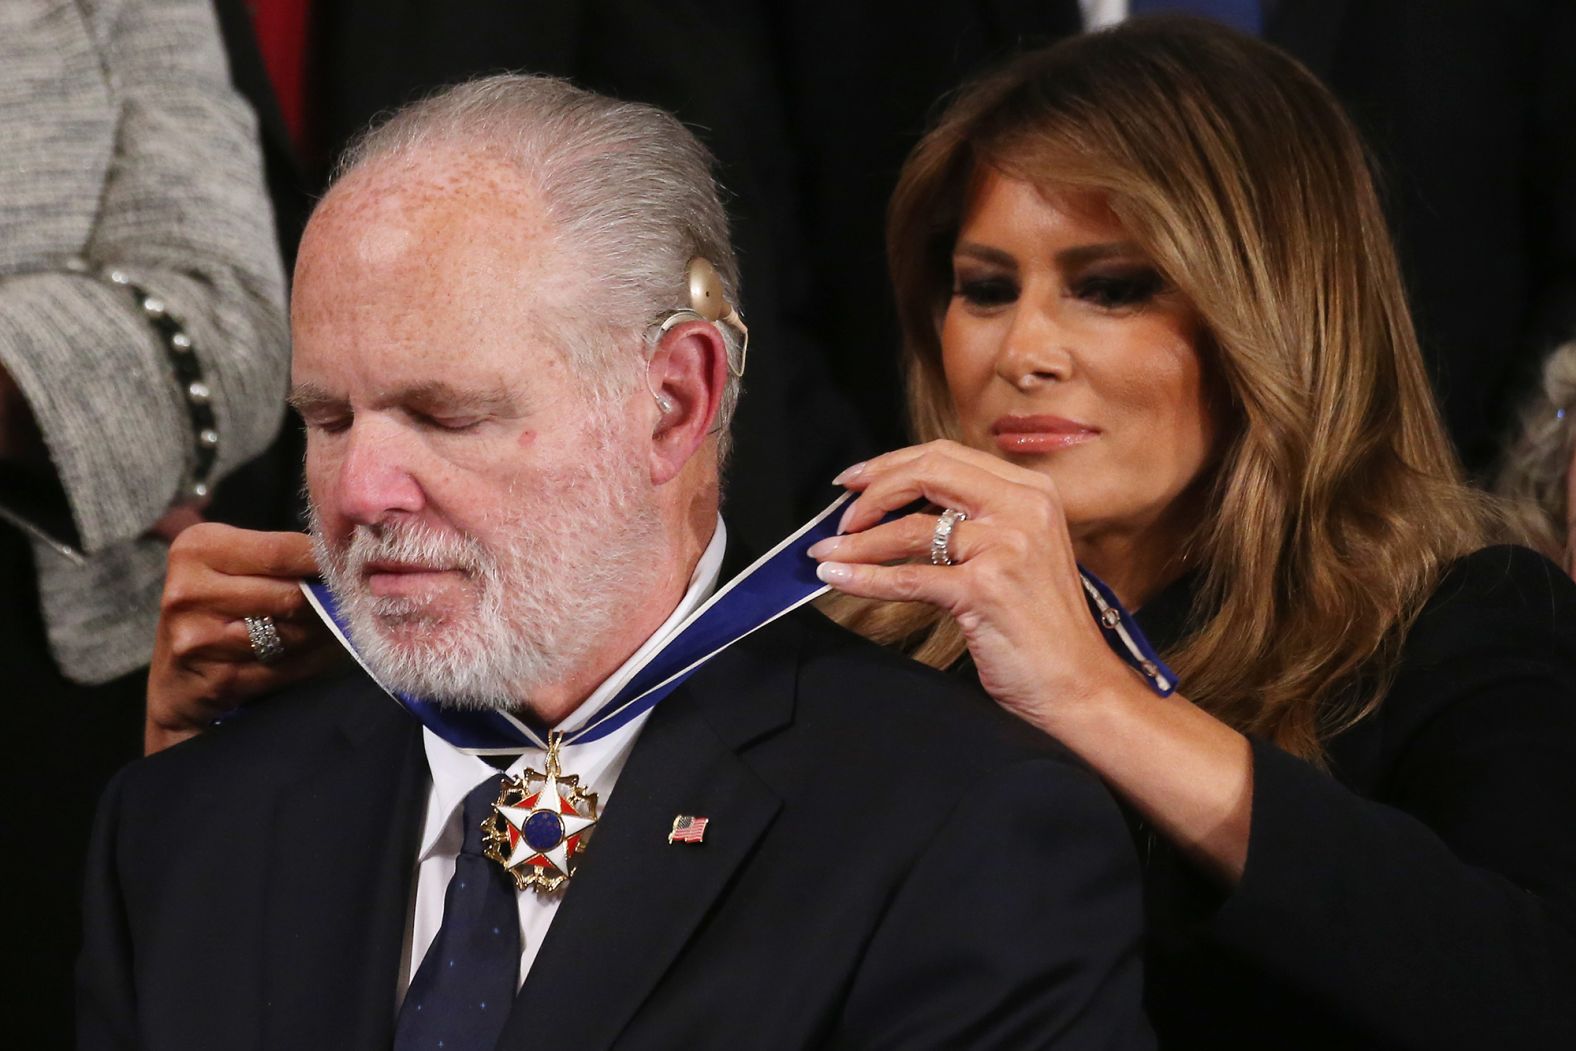 First lady Melania Trump gives conservative media icon <a href="index.php?page=&url=https%3A%2F%2Fwww.cnn.com%2F2021%2F02%2F17%2Fmedia%2Frush-limbaugh-obituary%2Findex.html" target="_blank">Rush Limbaugh</a> the Presidential Medal of Freedom during President Donald Trump's annual address in 2020, a day after Limbaugh announced he had been diagnosed with advanced cancer. The decision to award Limbaugh the medal ignited fury among those who pointed to the radio host's divisive rhetoric and inflammatory comments.